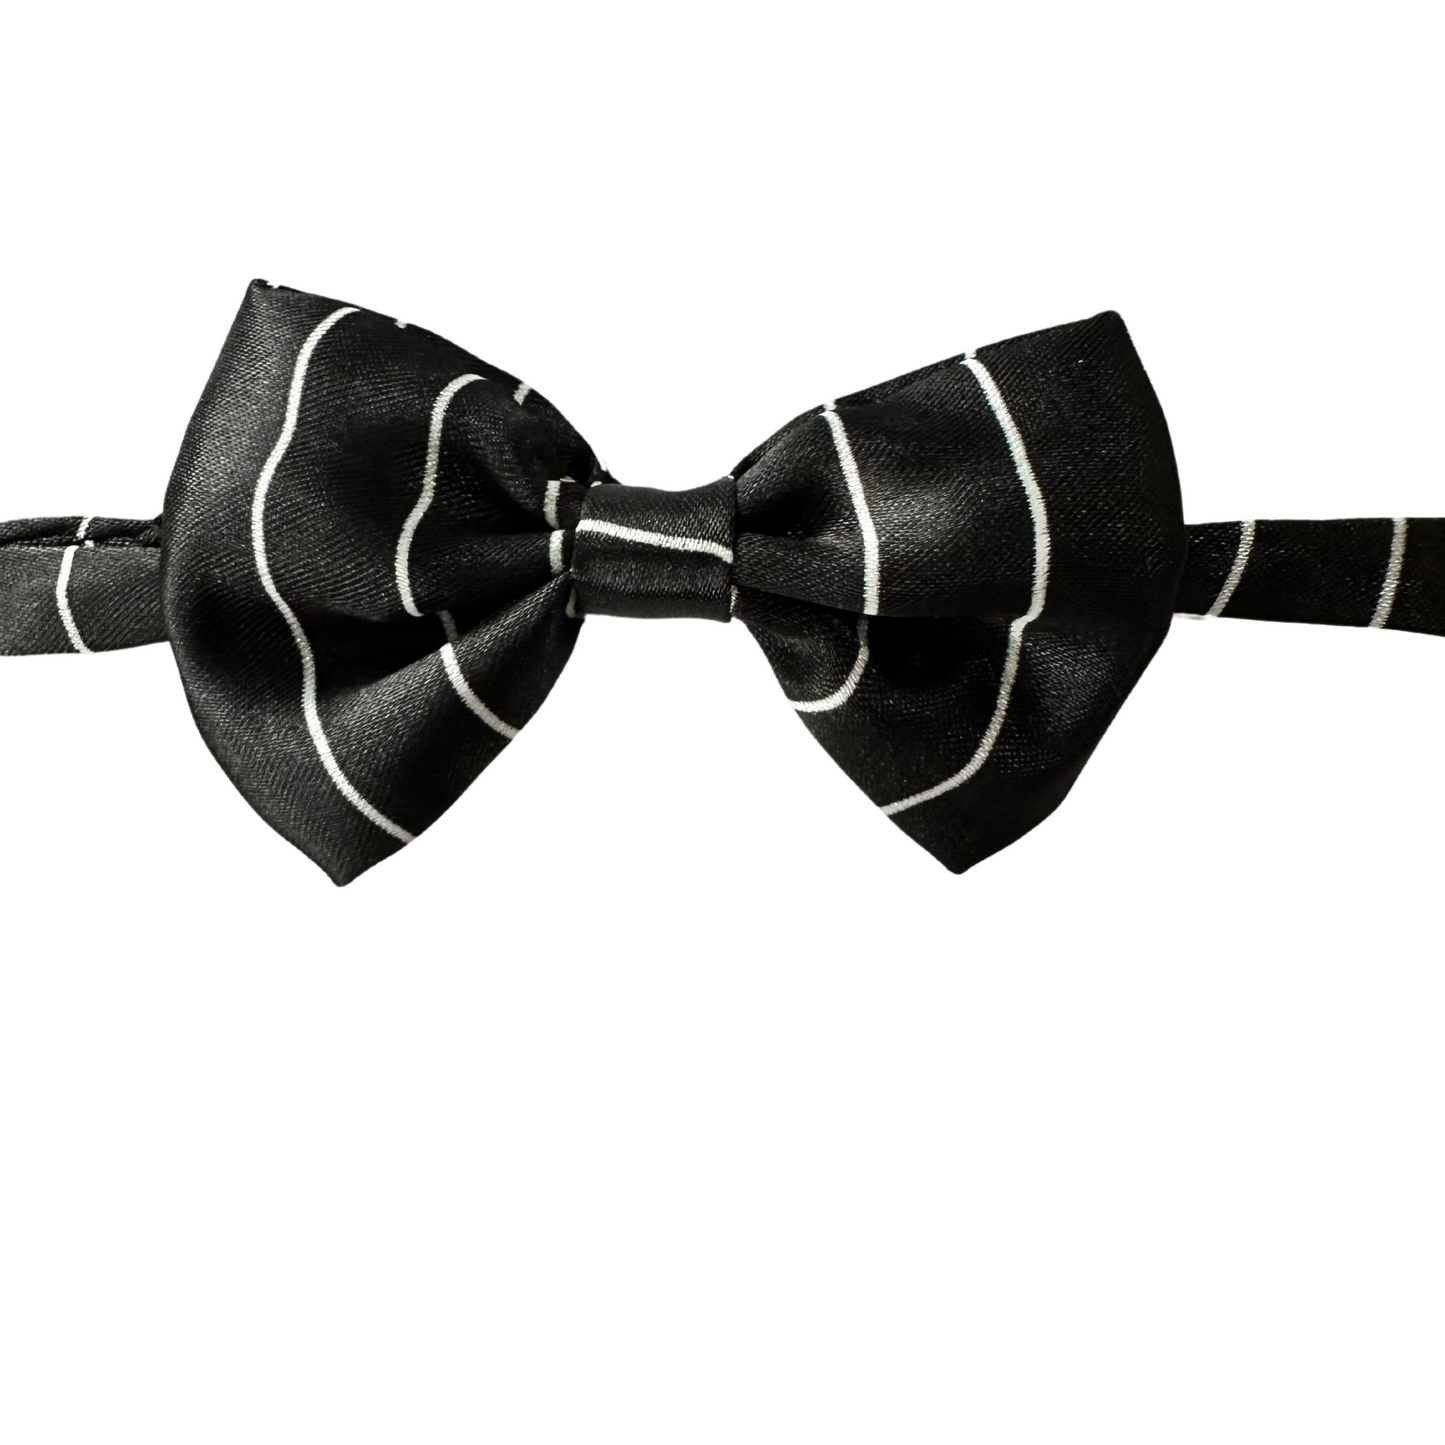 Silky Adjustable Bow Tie  | Dogs and Cats | Pink and Black Checker